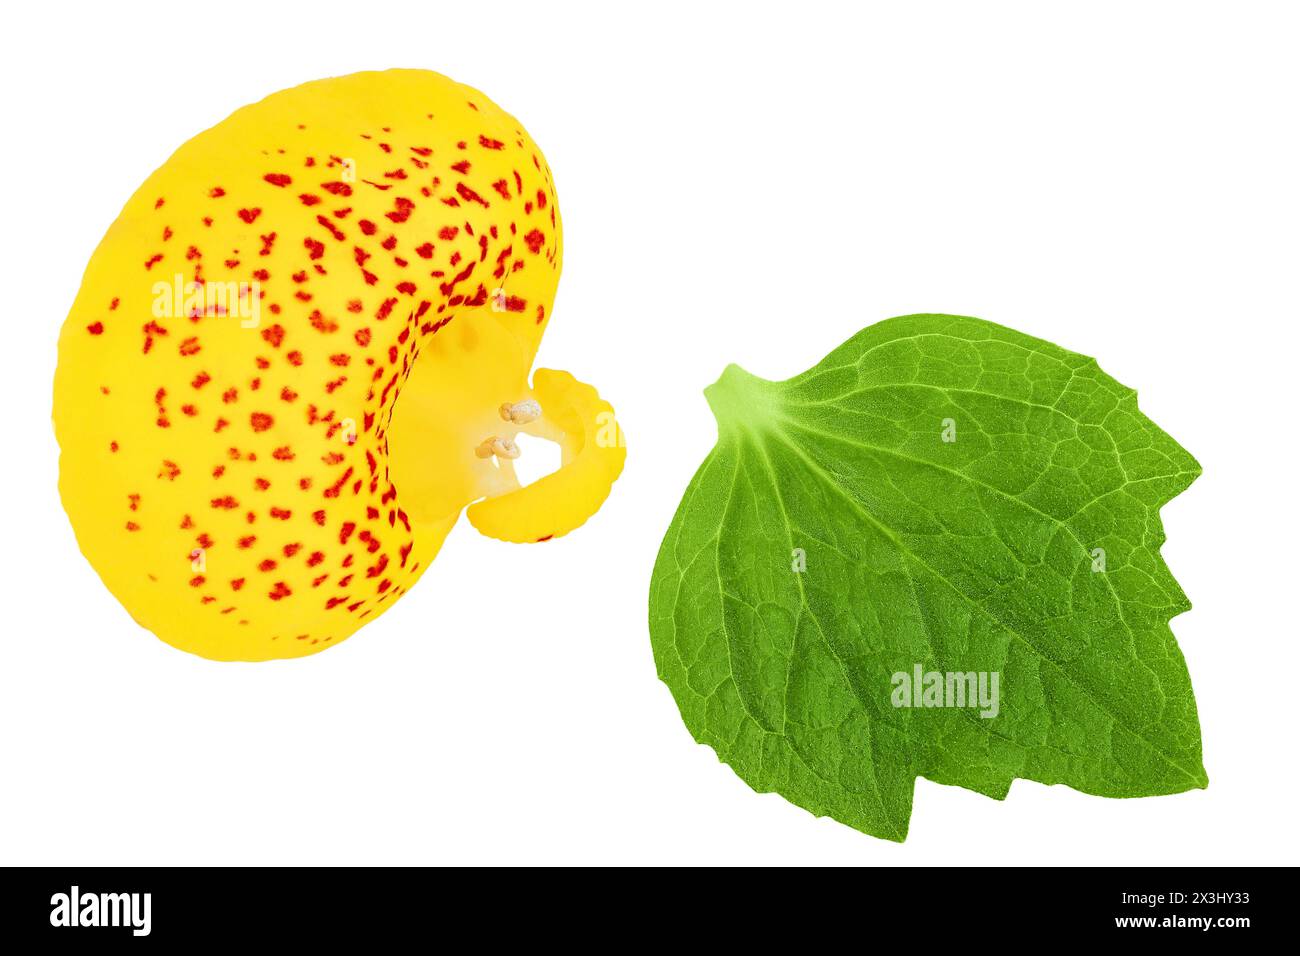 Calceolaria flower isolated on white background. Top view. Flat lay Stock Photo